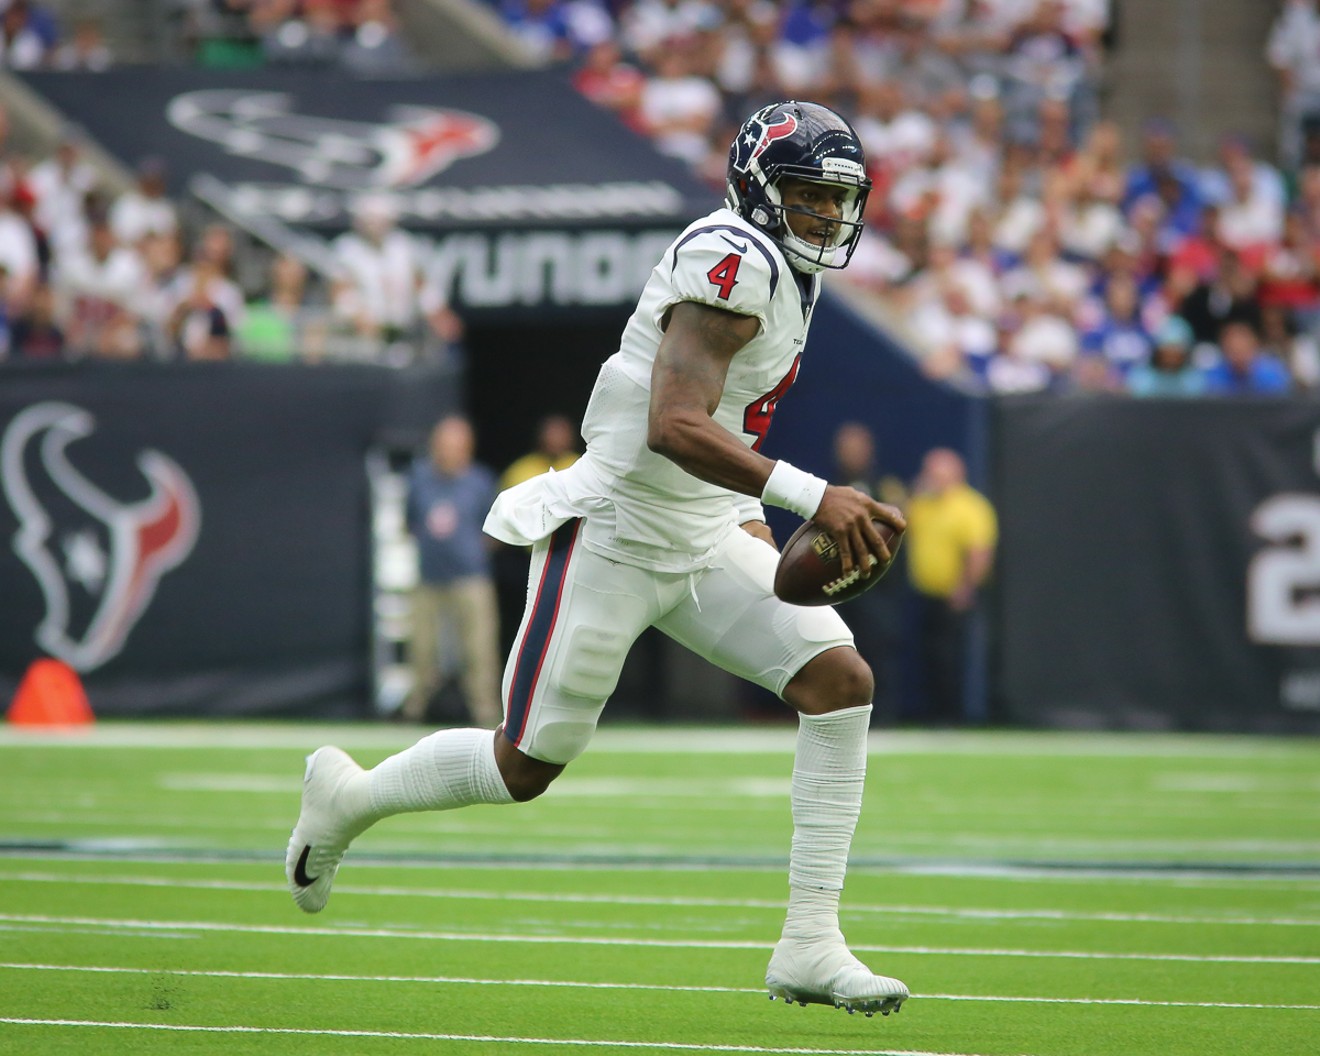 On Sunday, Watson and the Texans had many opportunities to put the Washington Redskins away, but they let them hang around.